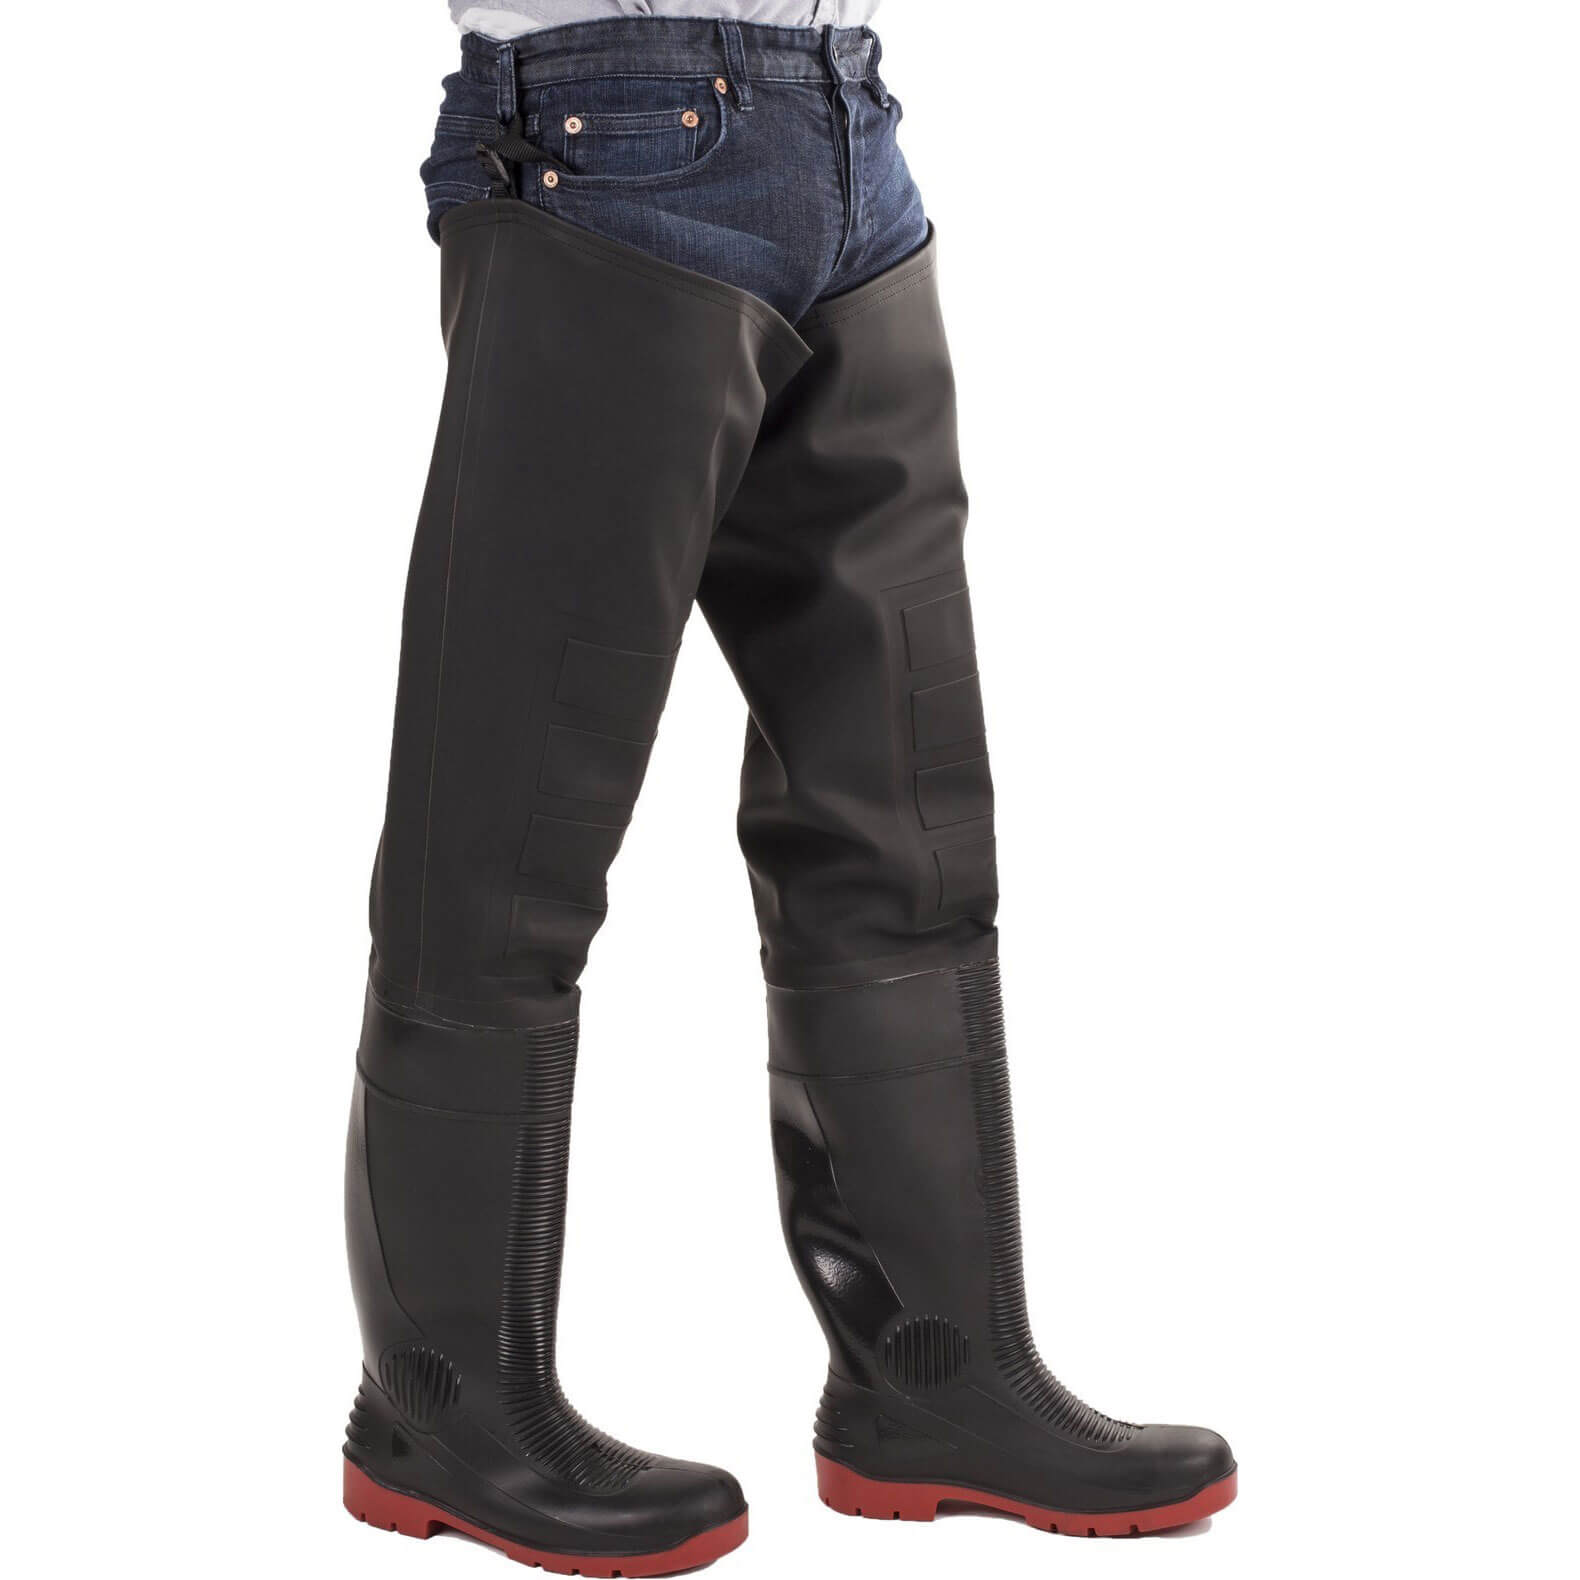 Image of Amblers Safety Rhone Thigh Safety Wader Black / Red Size 12